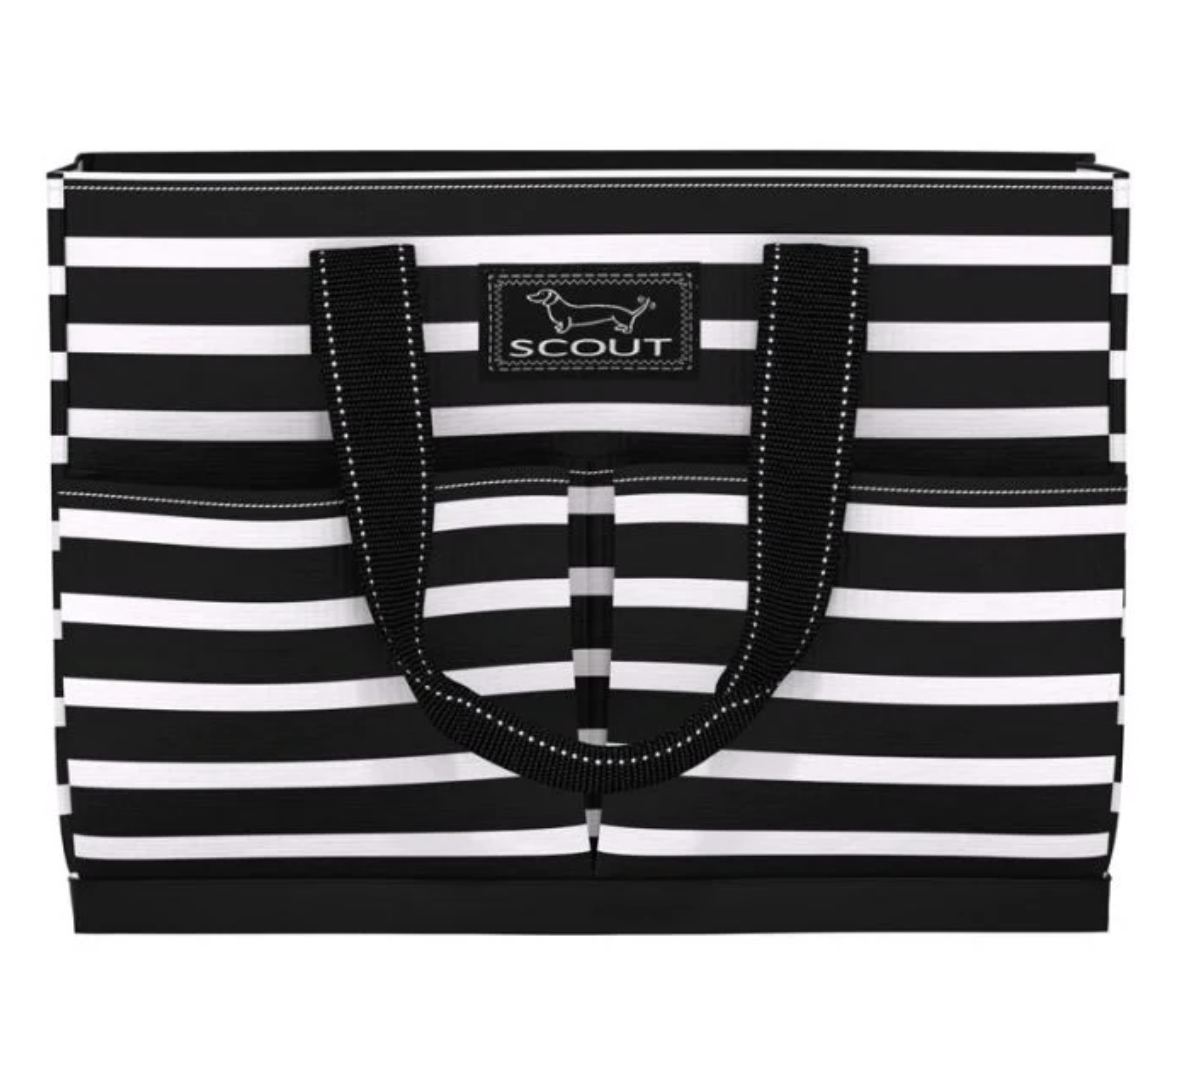 Scout Bags Uptown Girl, Fleetwood Black